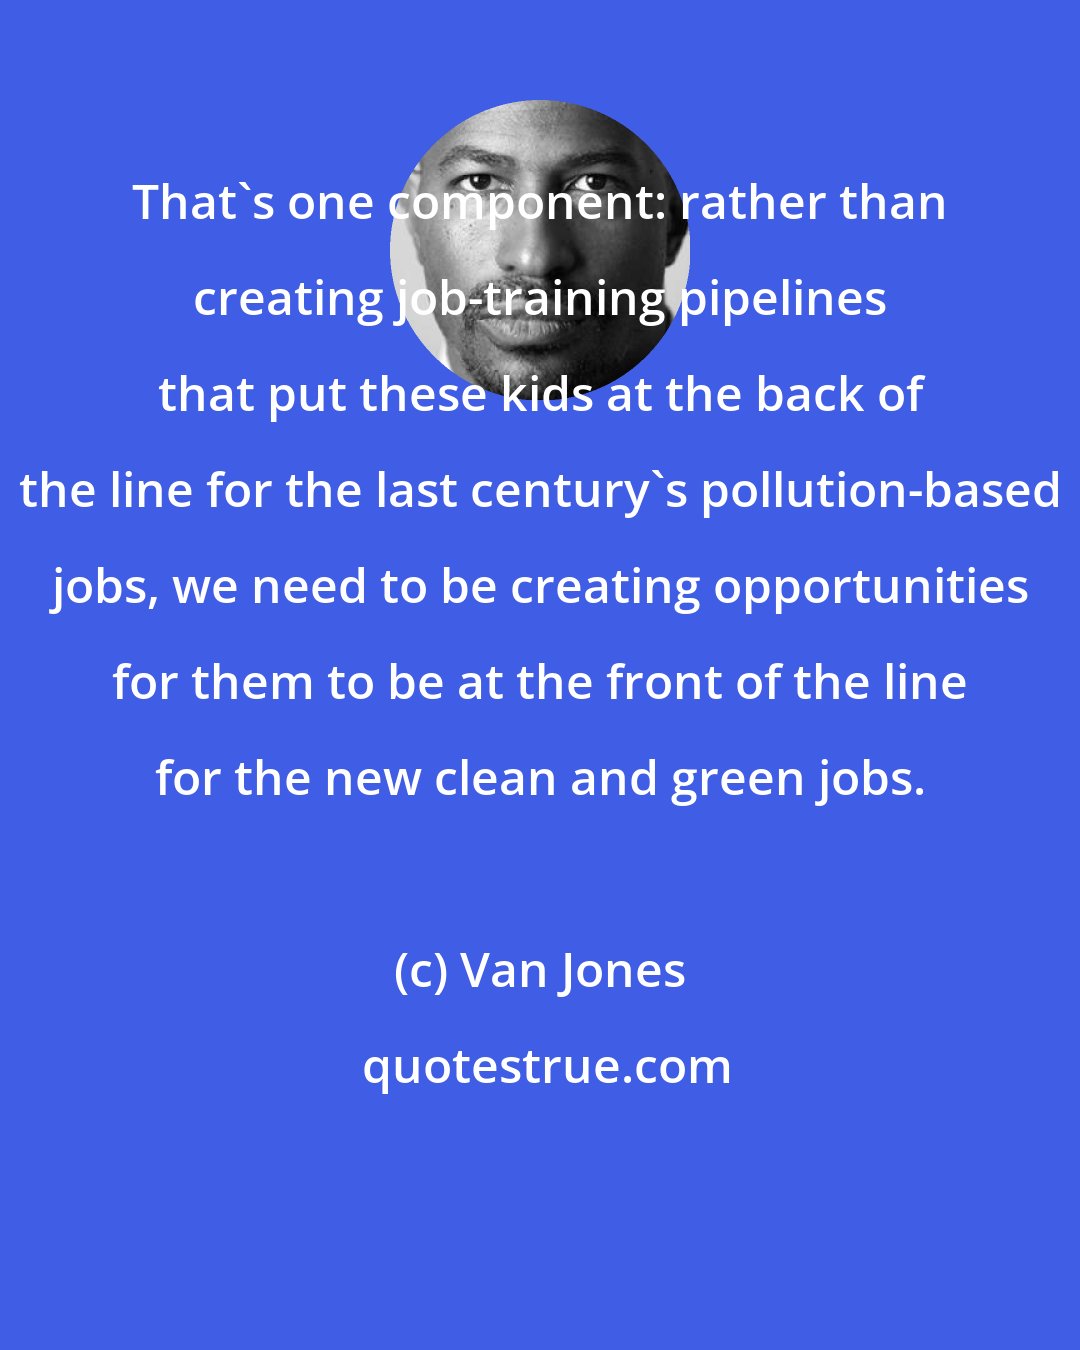 Van Jones: That's one component: rather than creating job-training pipelines that put these kids at the back of the line for the last century's pollution-based jobs, we need to be creating opportunities for them to be at the front of the line for the new clean and green jobs.